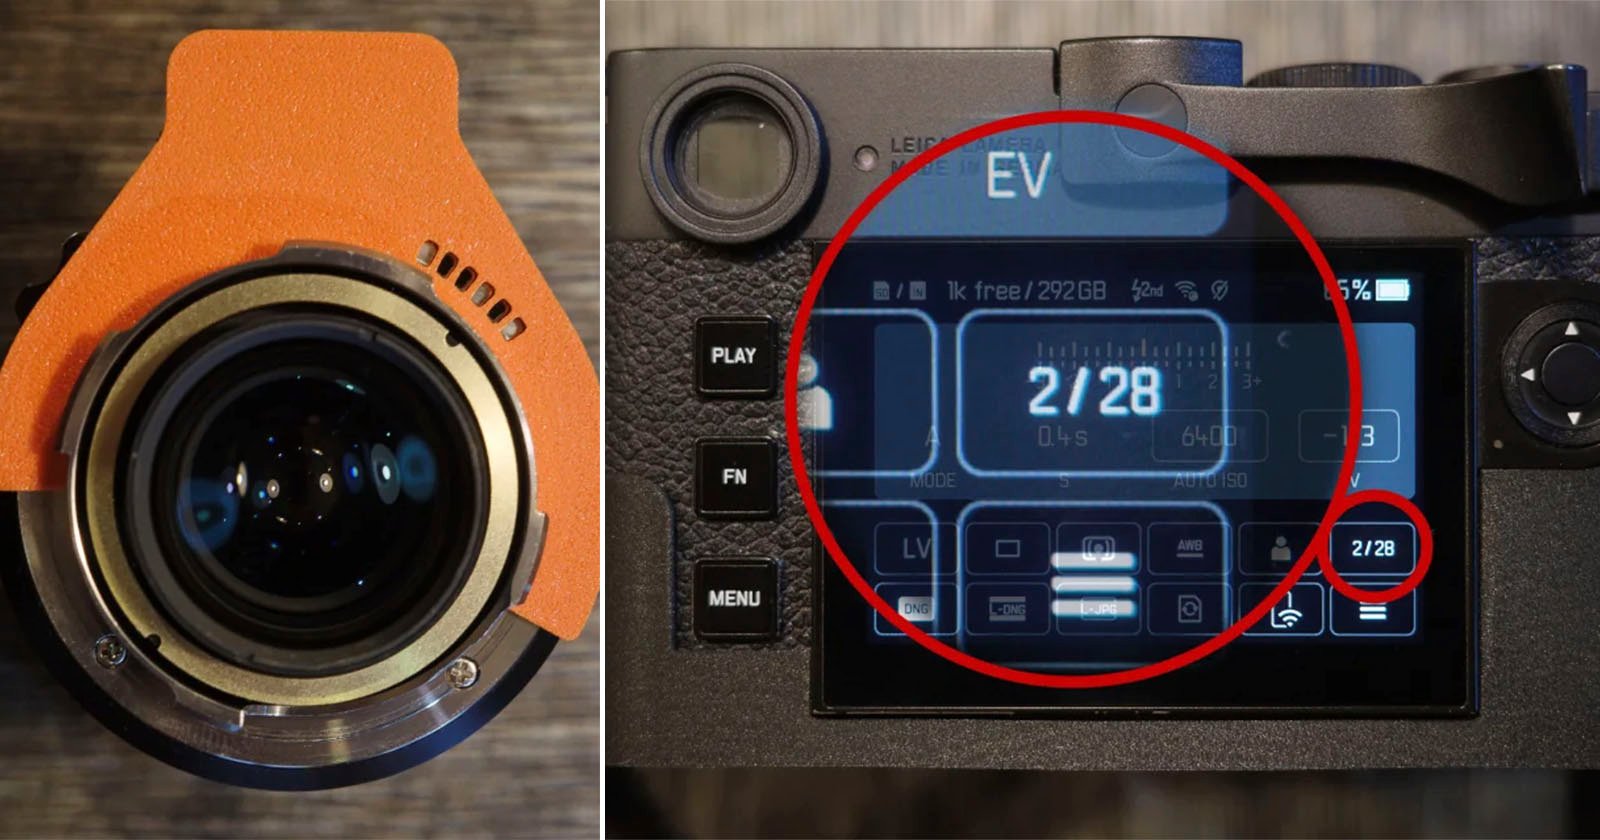 A close-up image showing the back screen of a Leica EV camera with the date and other settings displayed. To the left, another close-up highlights the camera's lens mount, featuring a small orange part. A red circle highlights the 2/28 date setting on the screen.